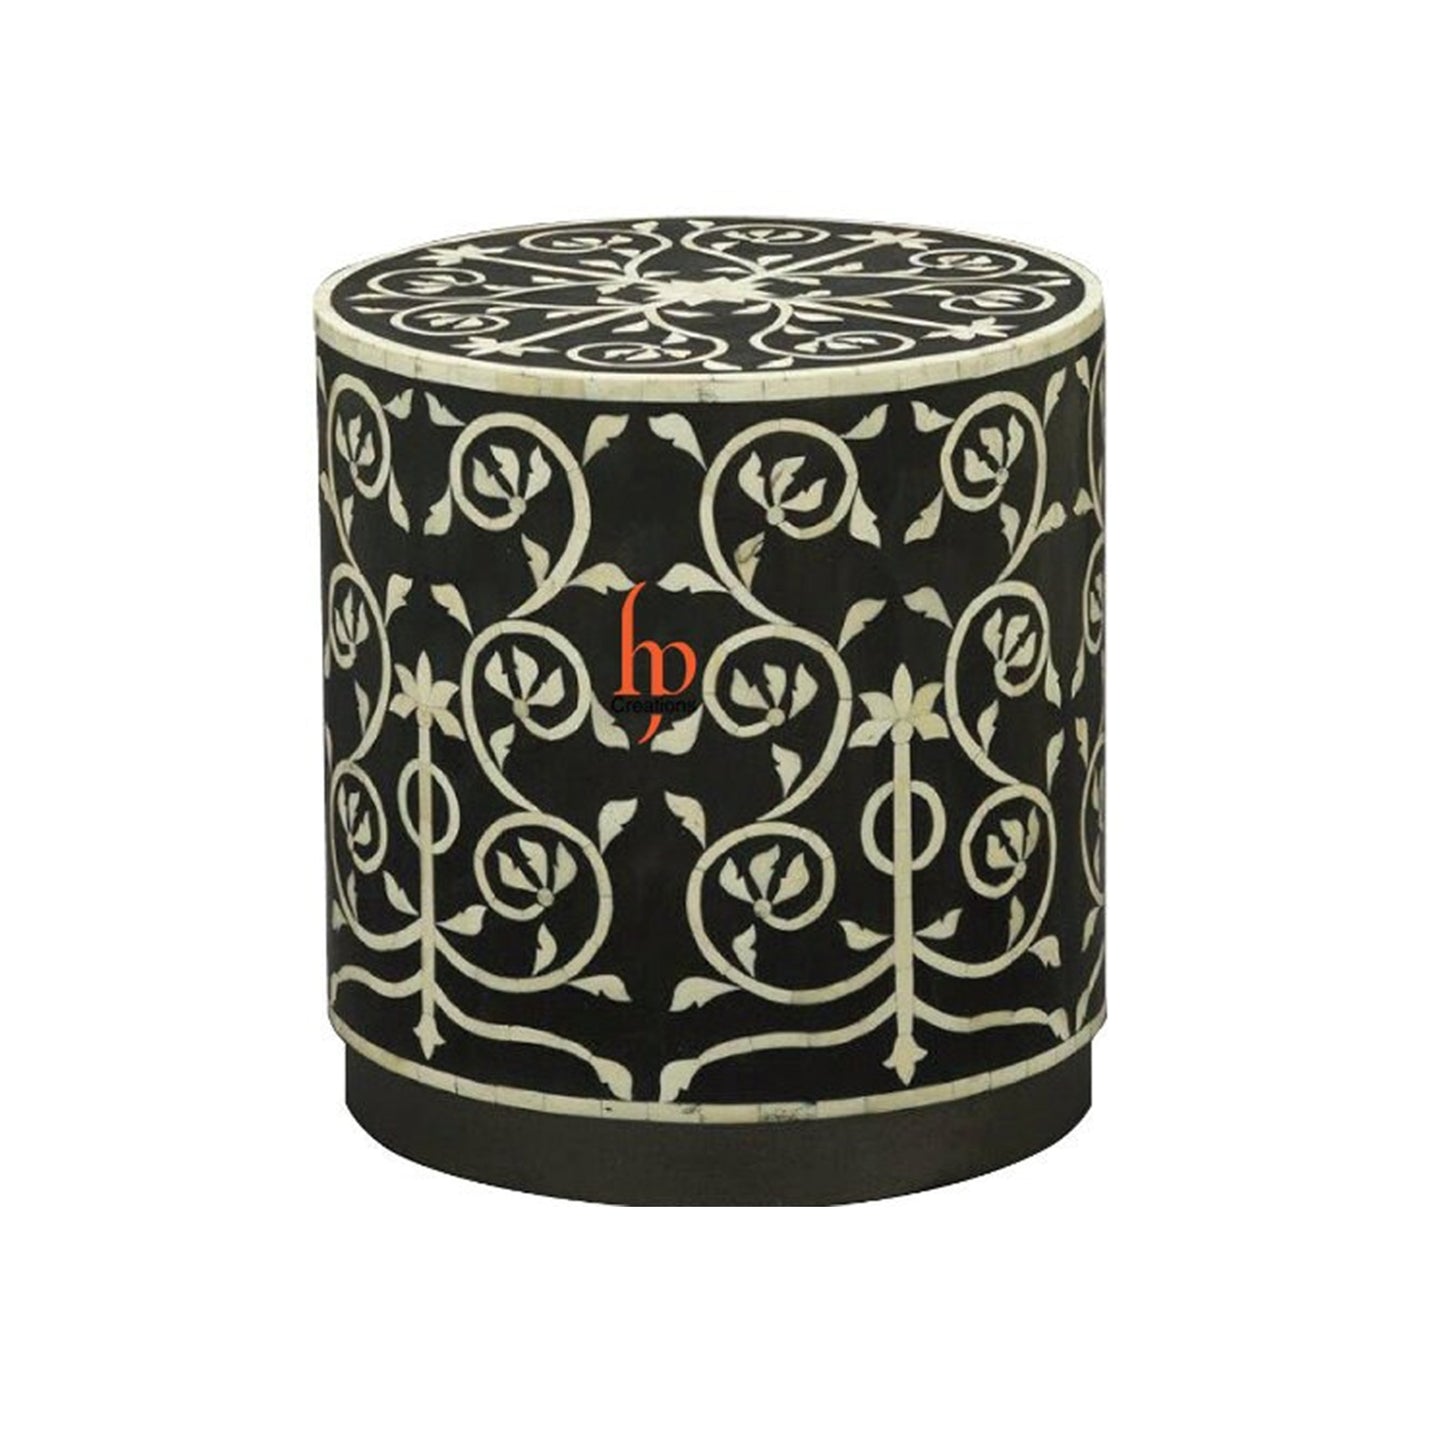 personalized Bone Inlay Round Stool Home Decor Furniture Design Attractive Look Side Table Dinning Stool Classic Vintage Furniture